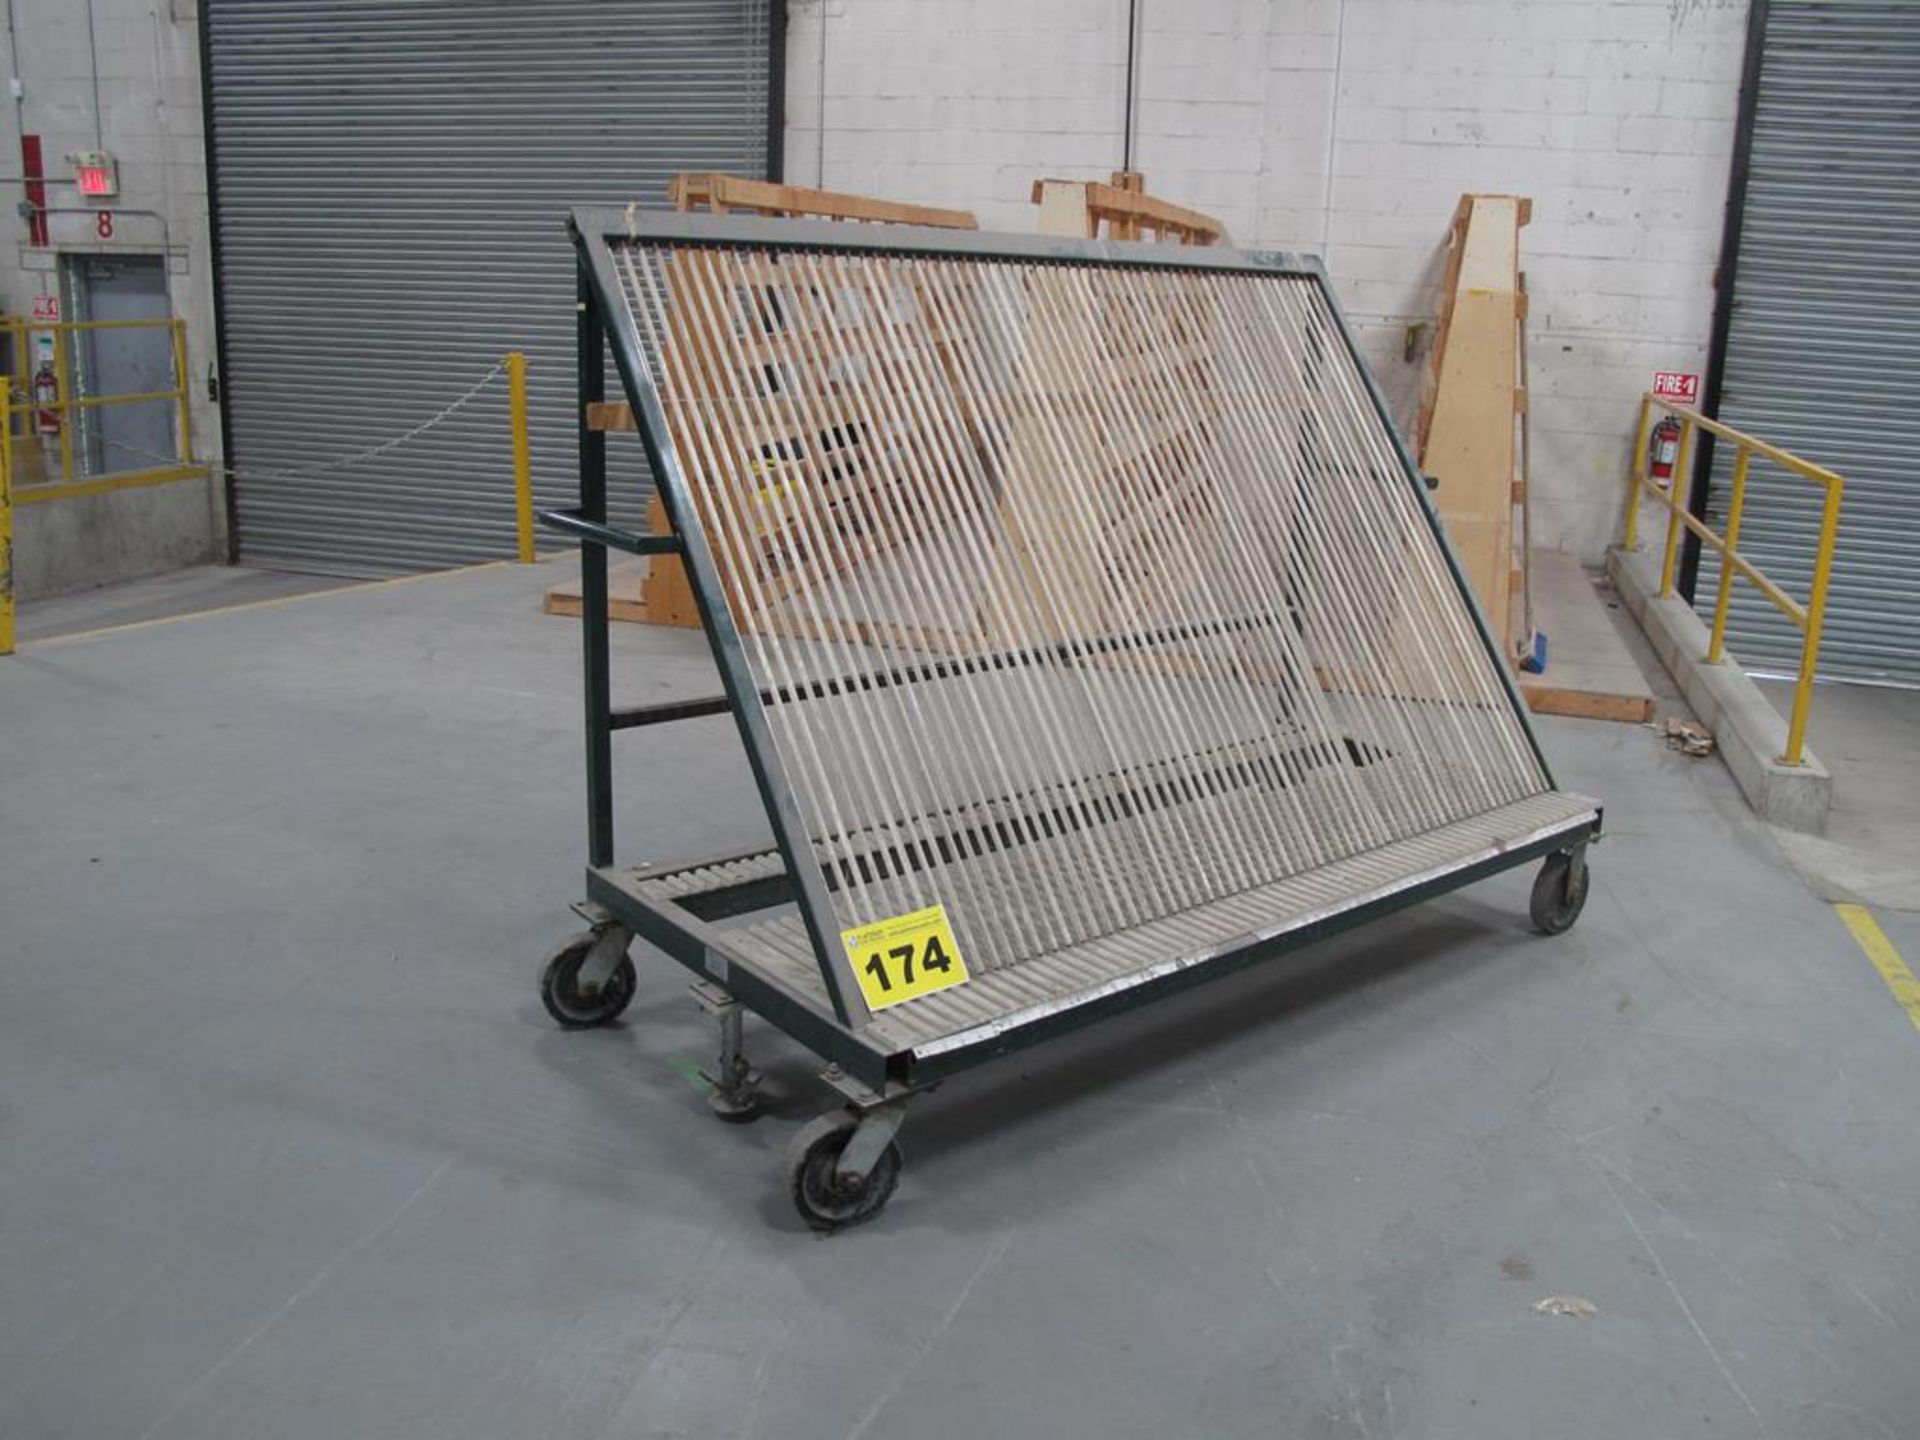 KEAR FAB, 4'X 4' X 6', 3,000 LBS (APPROX.) 60 SECTION, ROLLING PRODUCTION GLASS RACK WITH FOOT LOCK